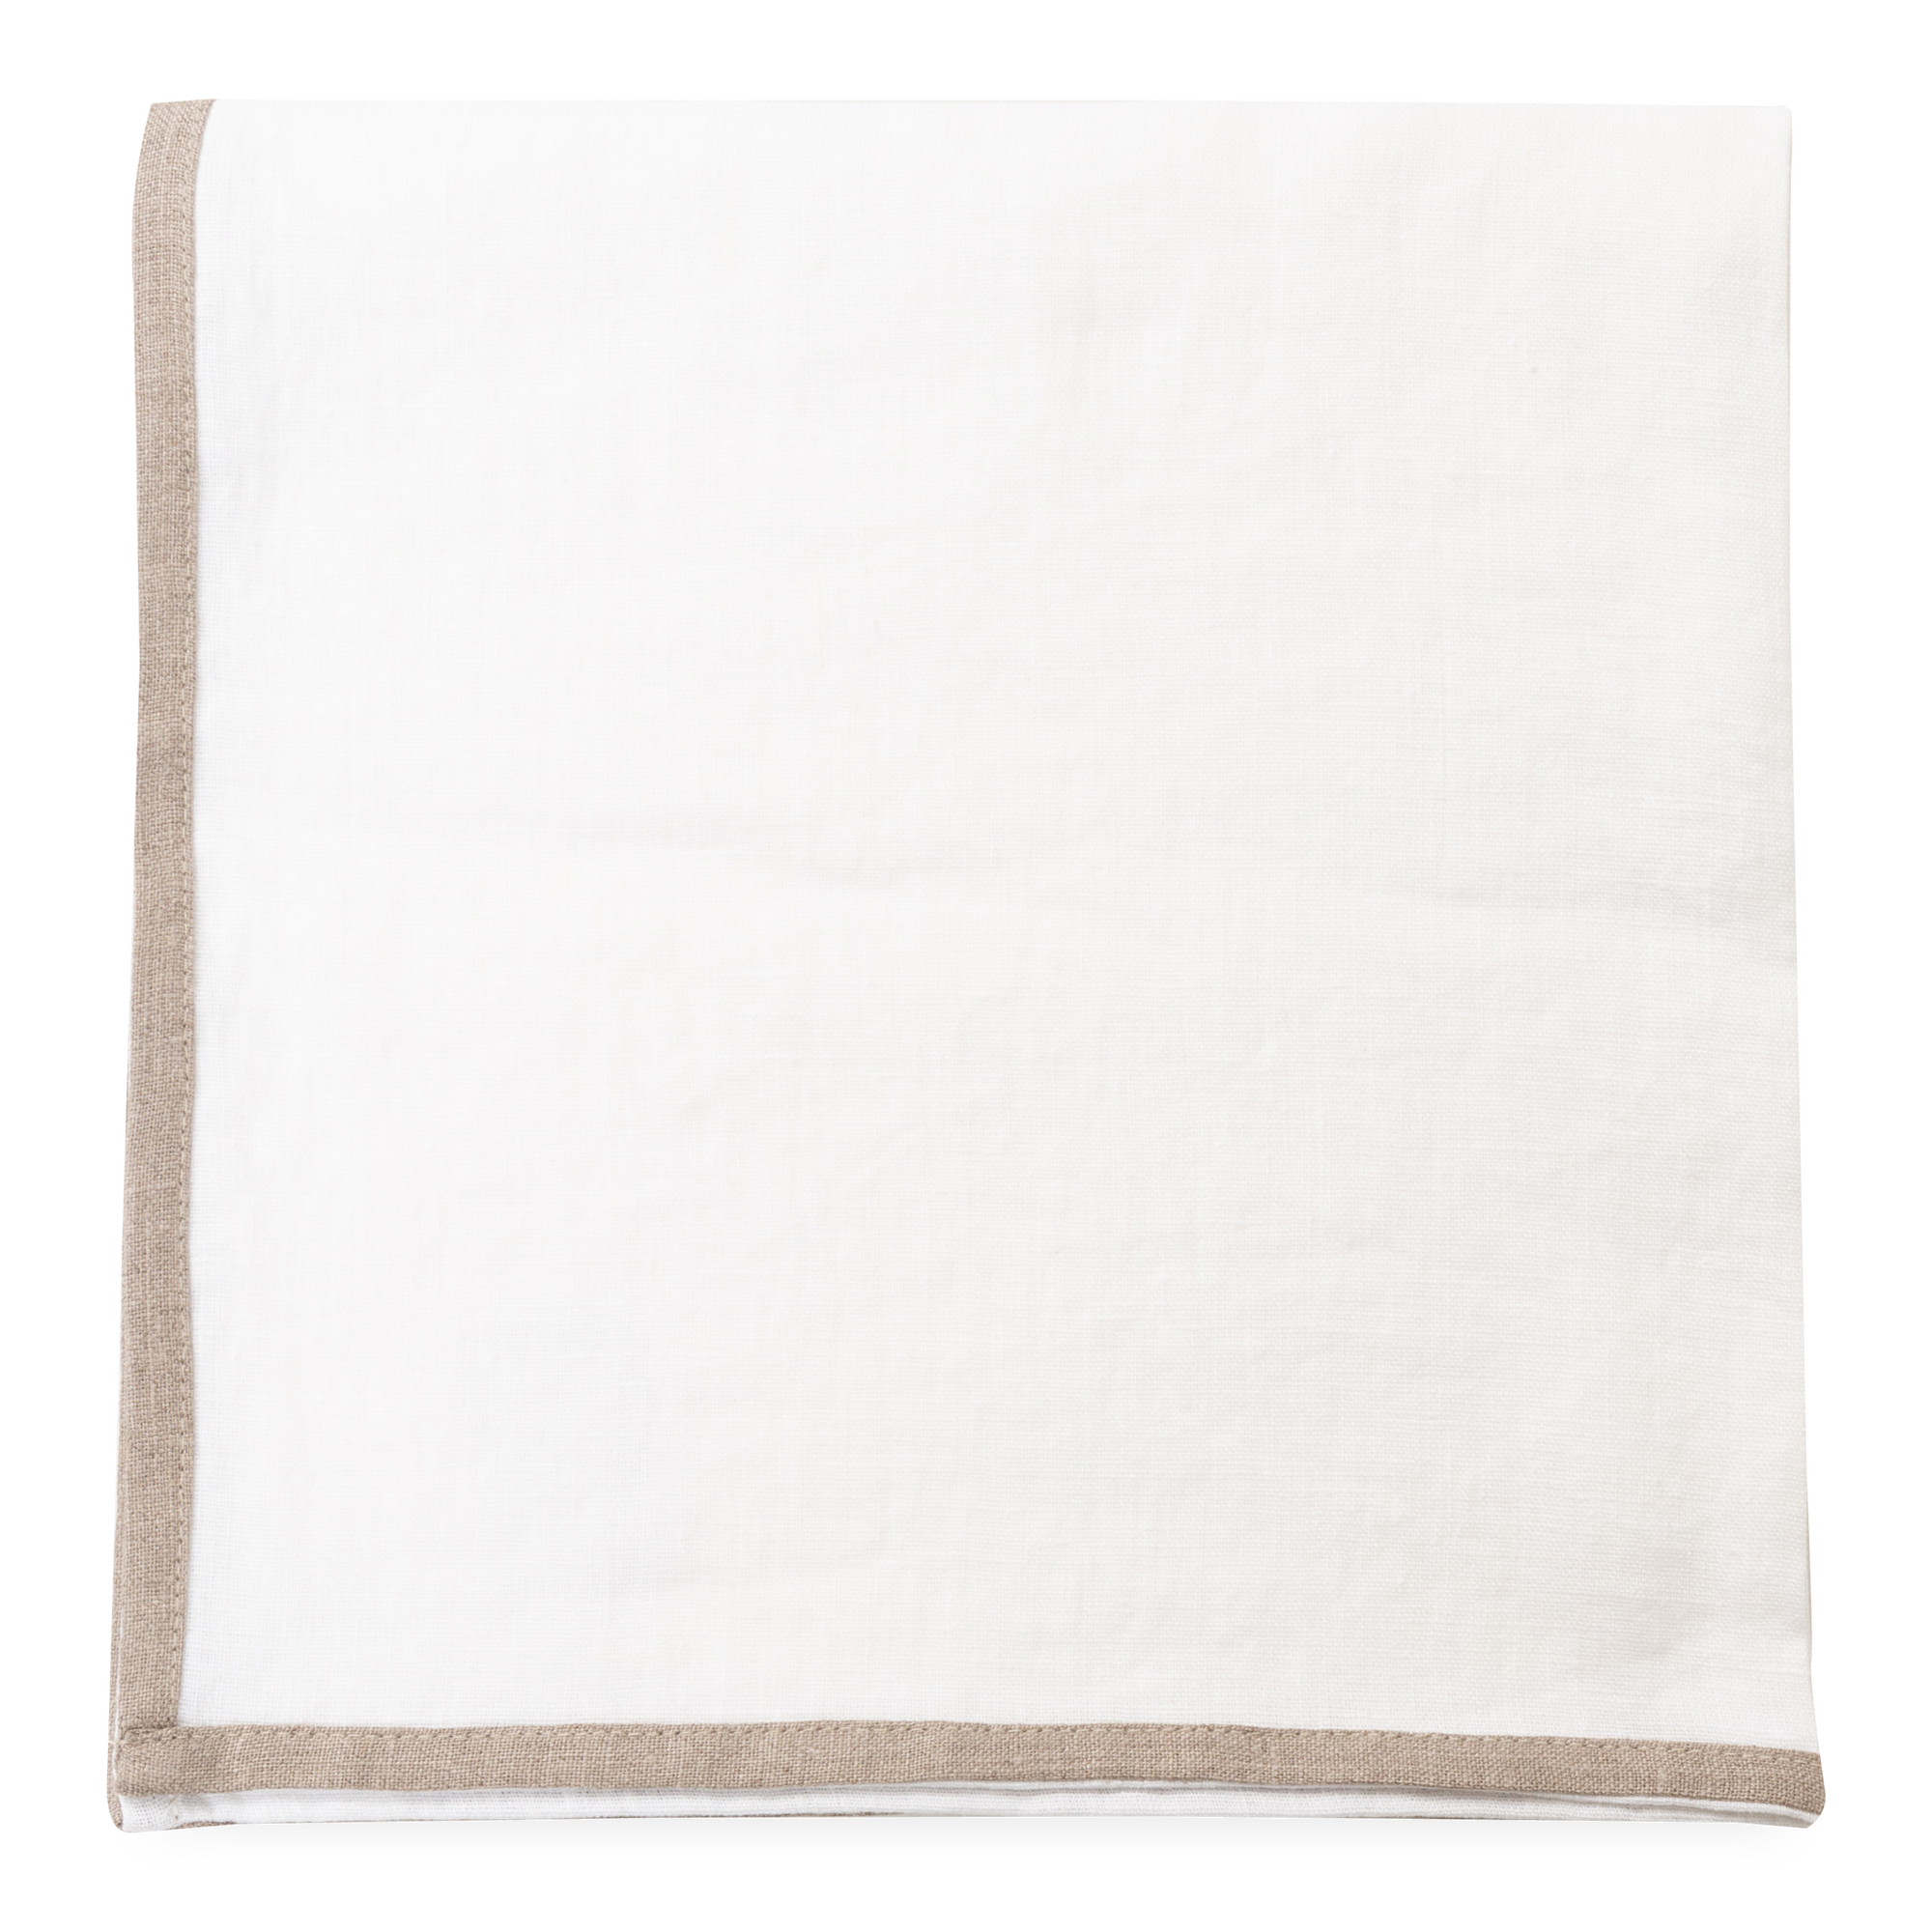 Handmade from European lint-free linen, the Bordered Linen Napkin is effortlessly soft and features an aesthetic border to create visual tabletop depth.